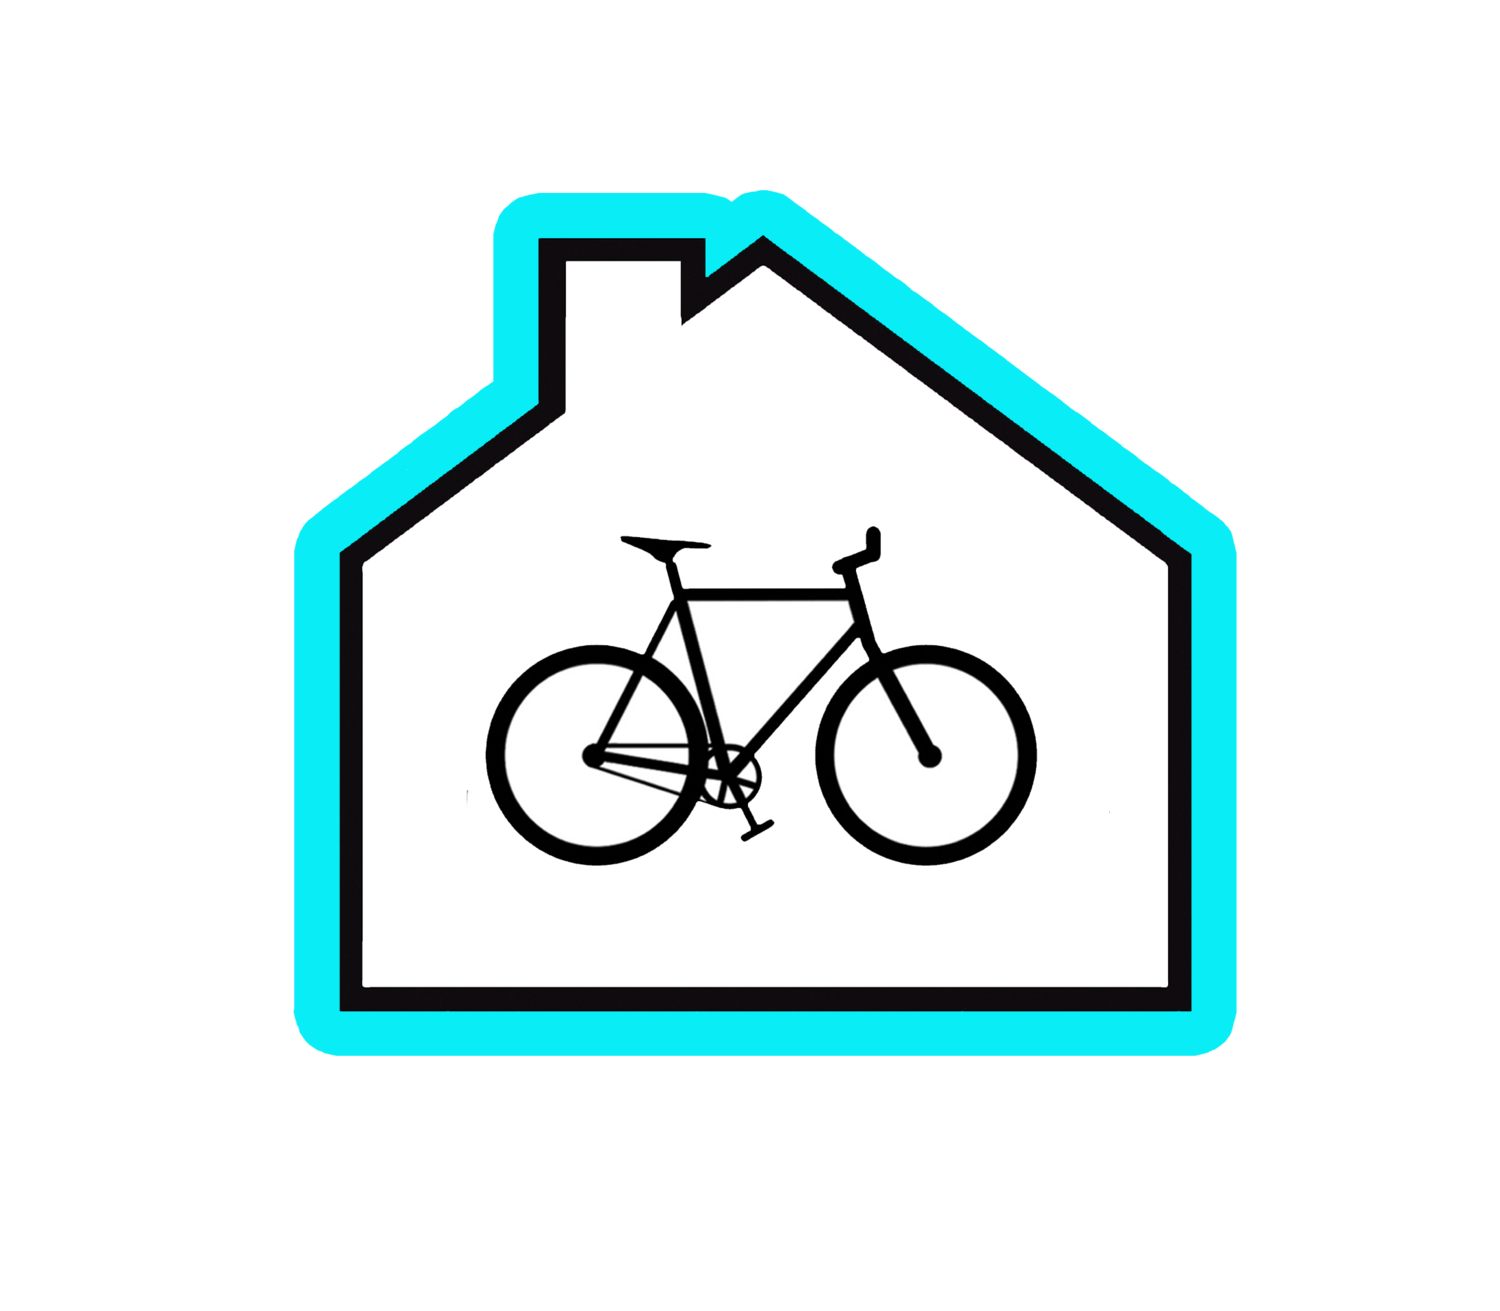 Real Estate By Bike